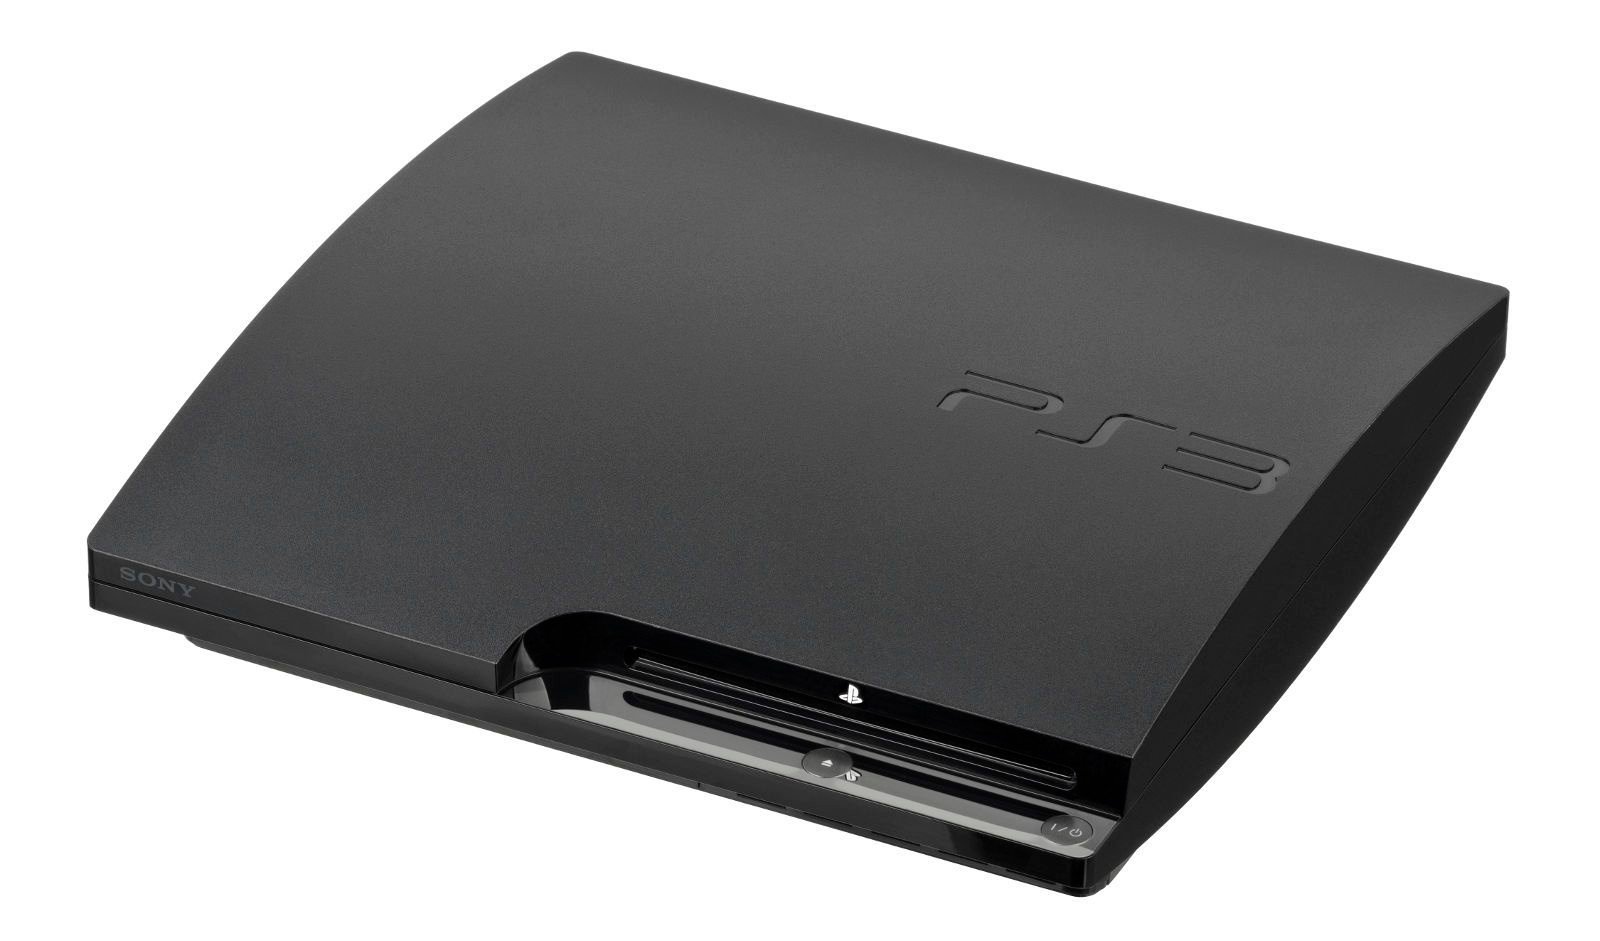 PS3 Firmware Update 4.90 Released, Here's What It Does